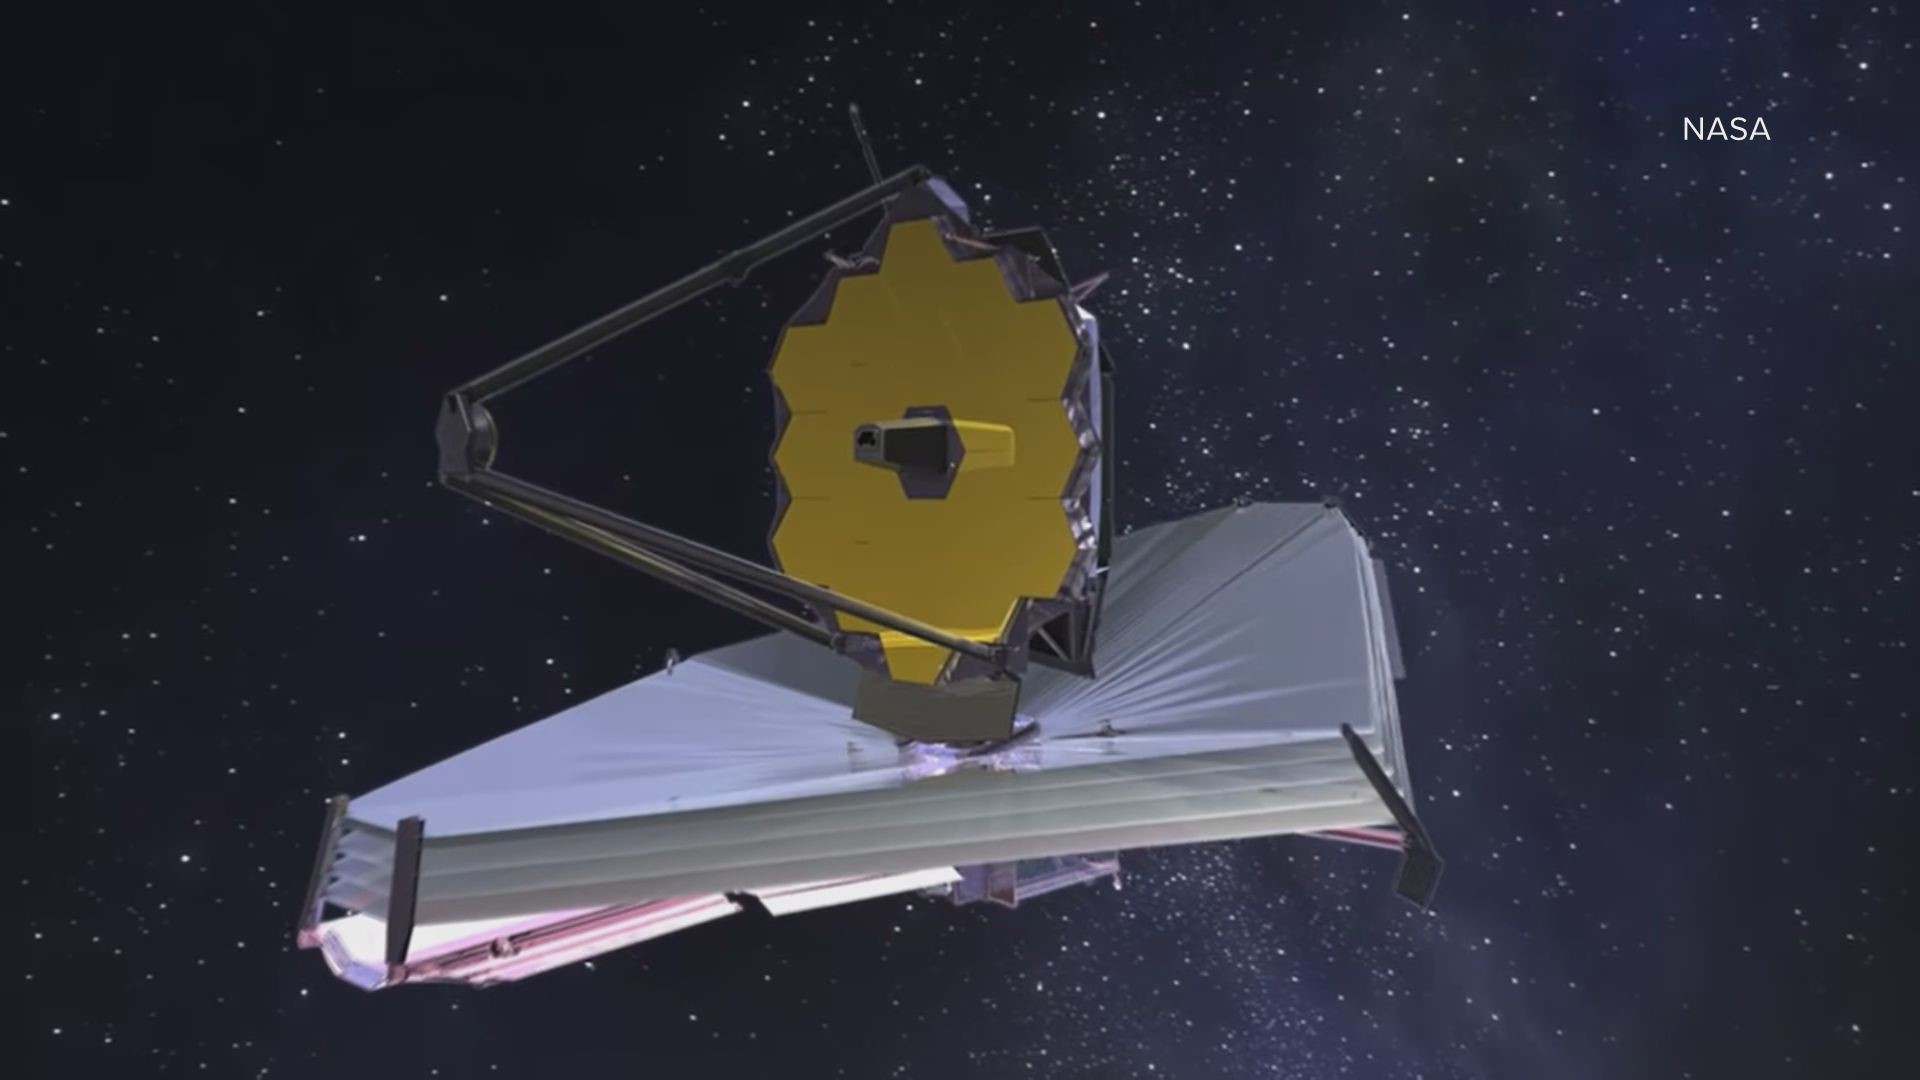 A new $10 billion space telescope will be launched on Friday. It's the James Webb Space Telescope and it'll give astronomers a deeper look at our universe.